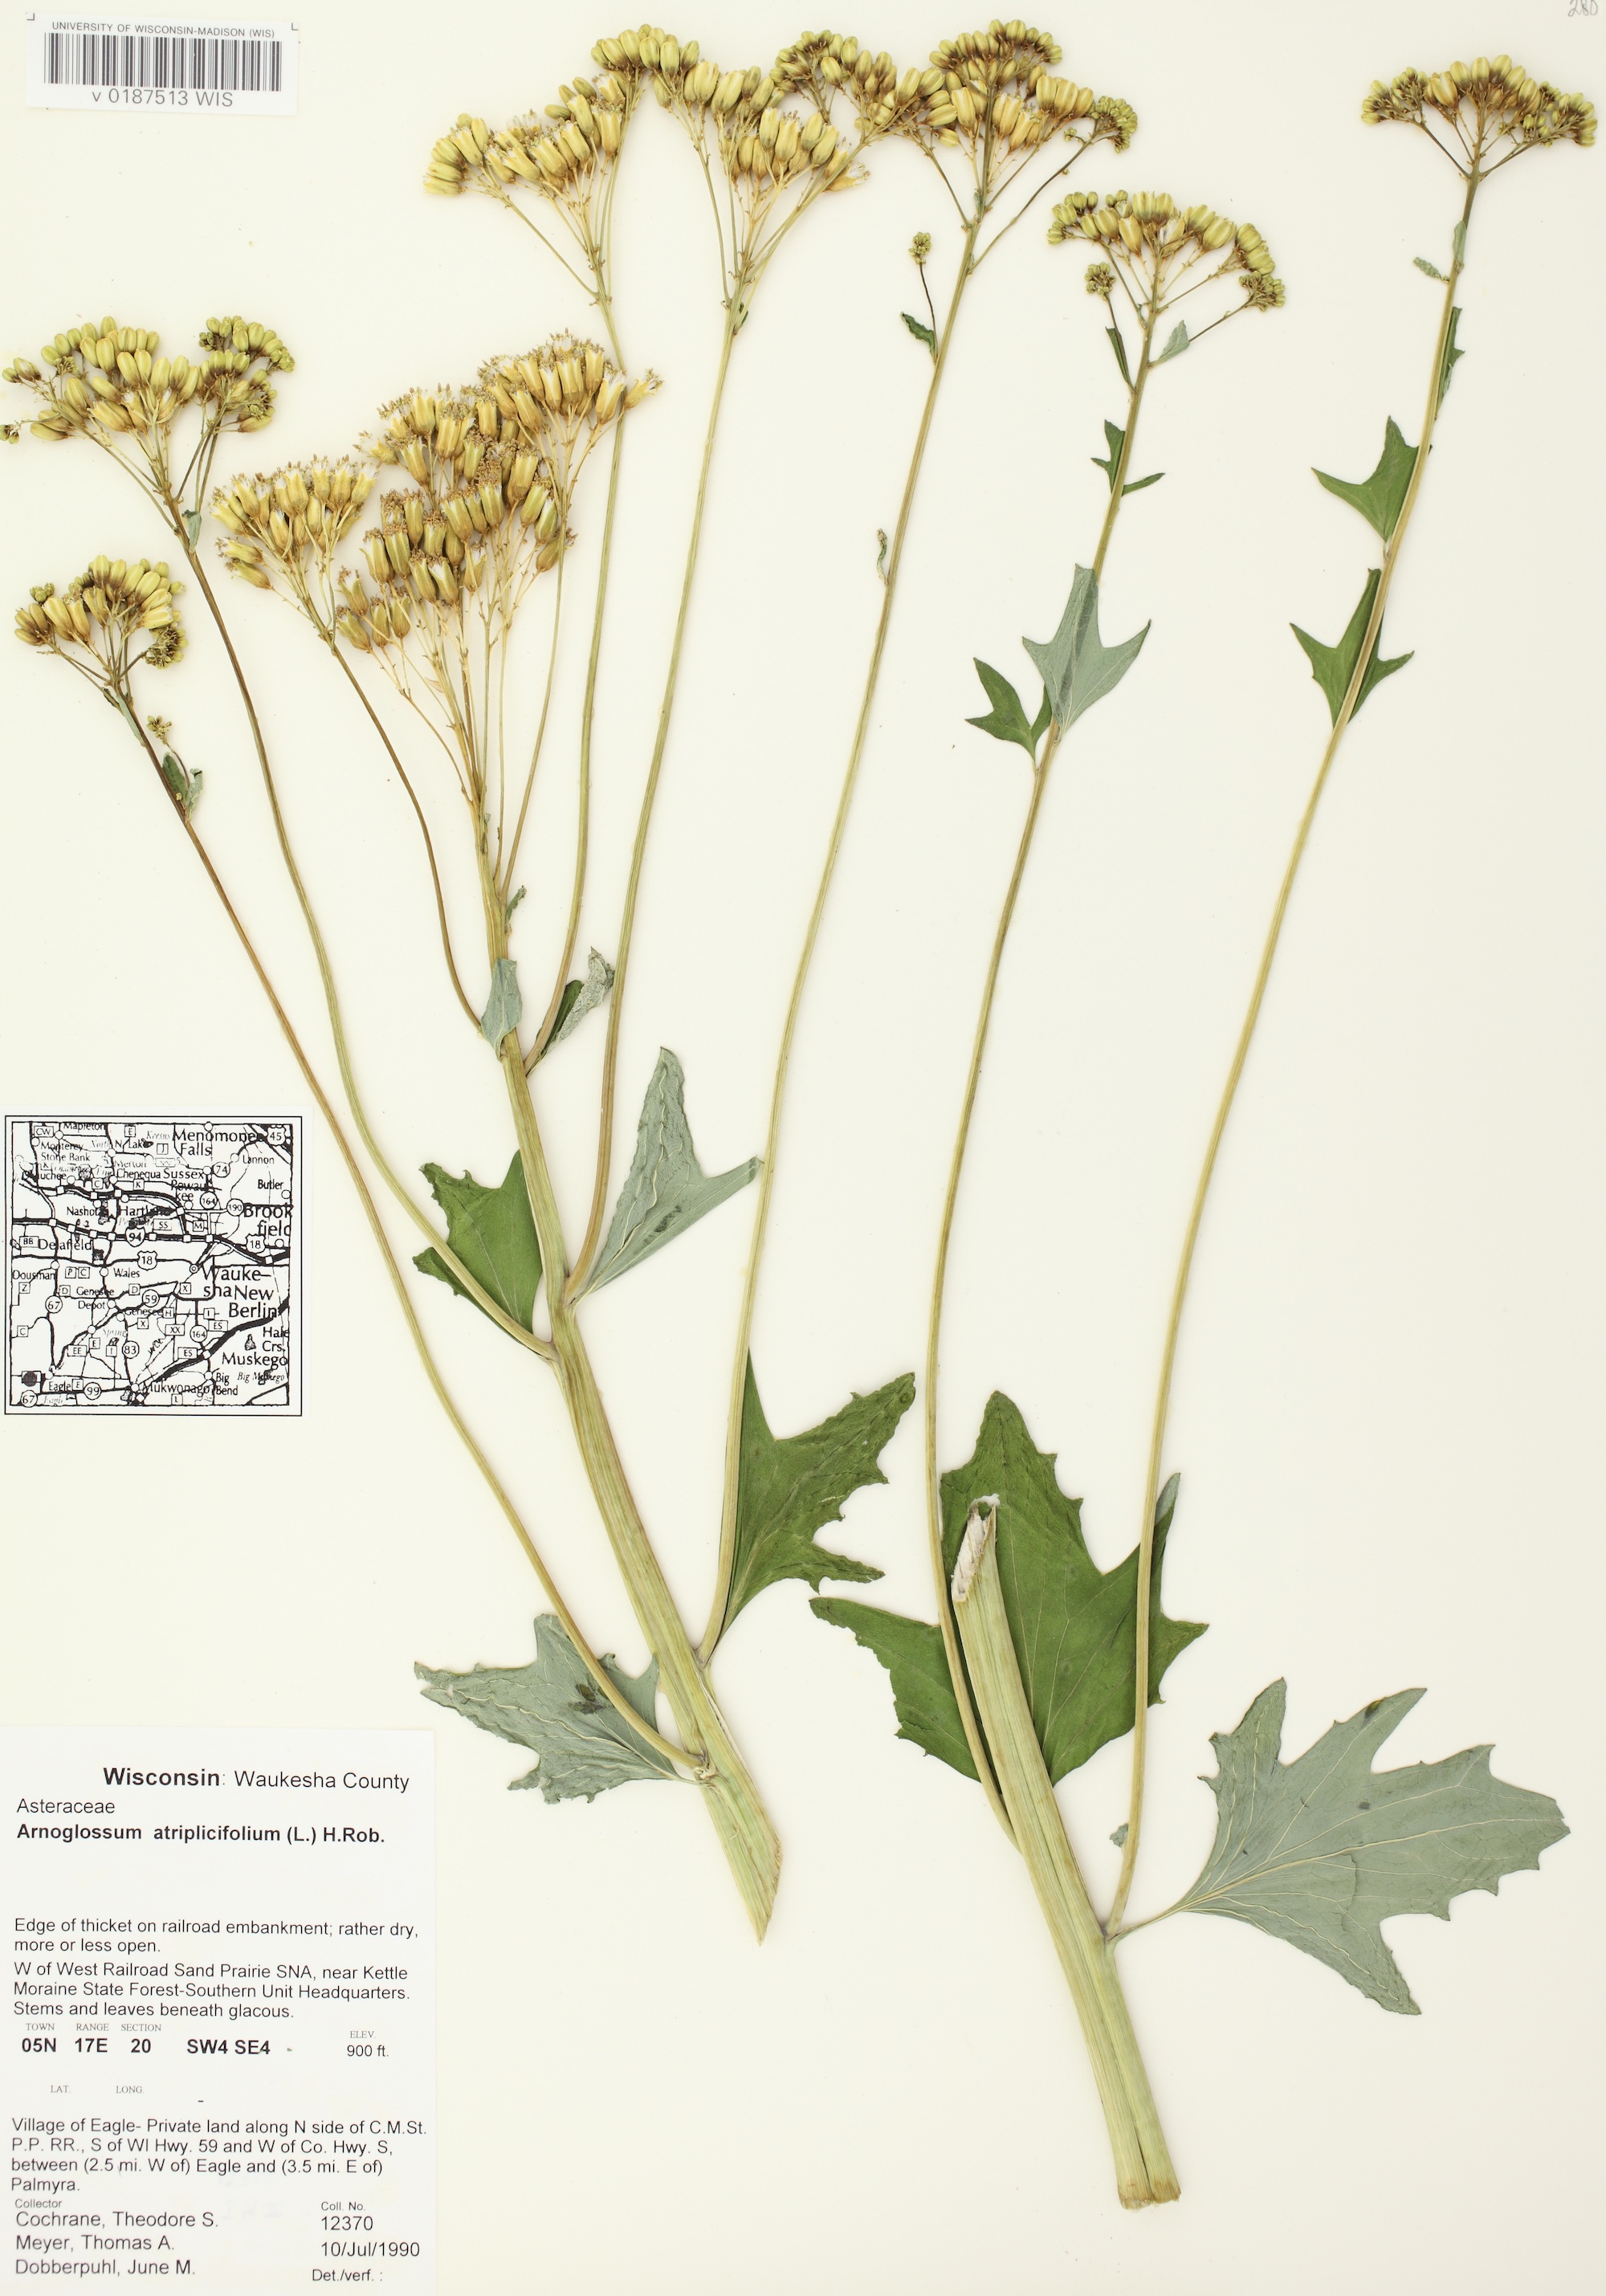 Pale Indian Plantain specimen collected in Waukesha County on July 10, 1990.